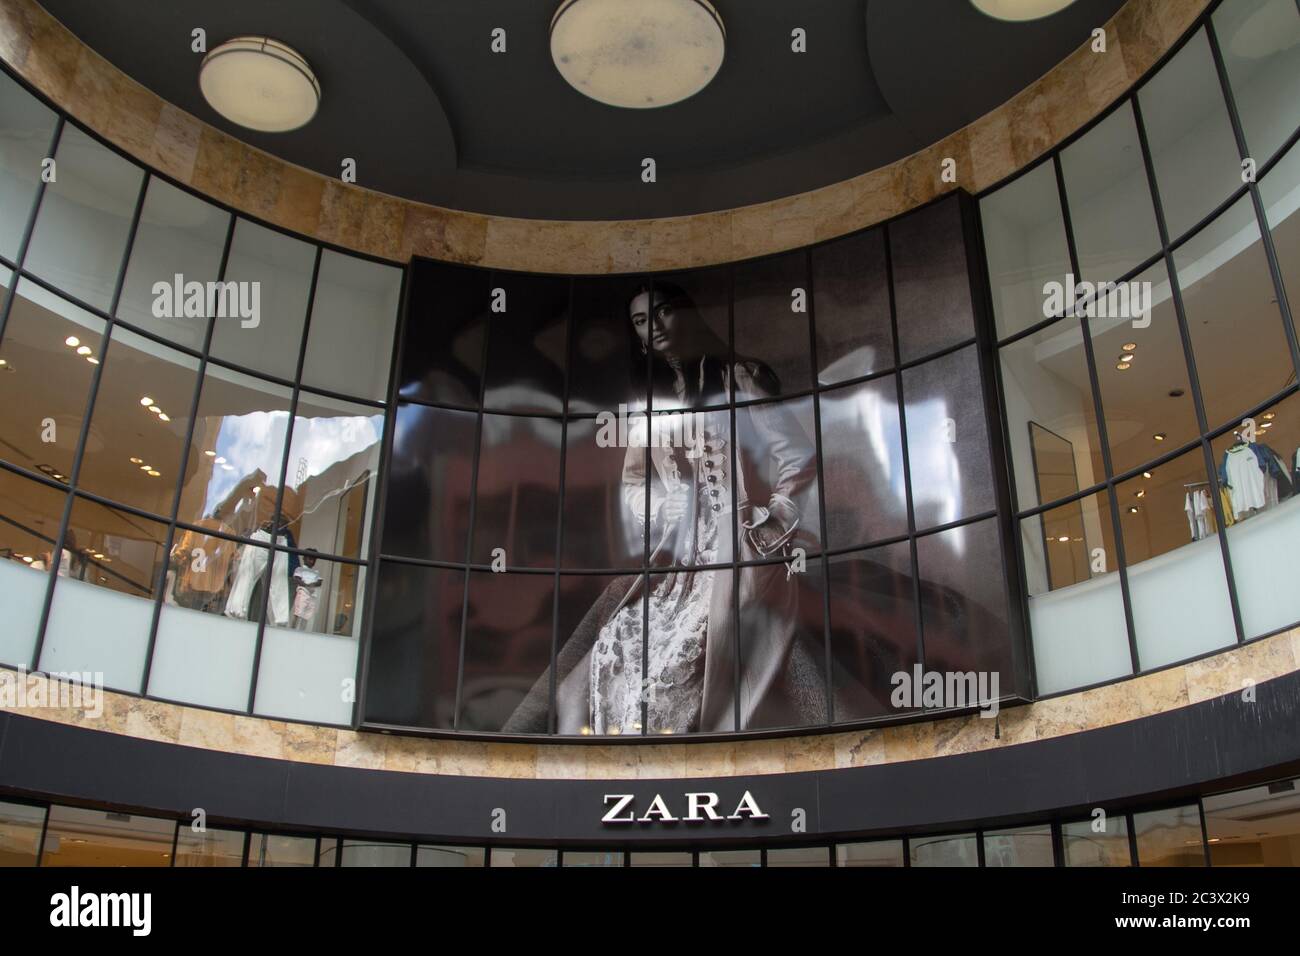 ZARA logo for Spanish clothing stores. Zara is the main fashion clothing brand for children and adults of the Spanish company Inditex, which also owns Stock Photo